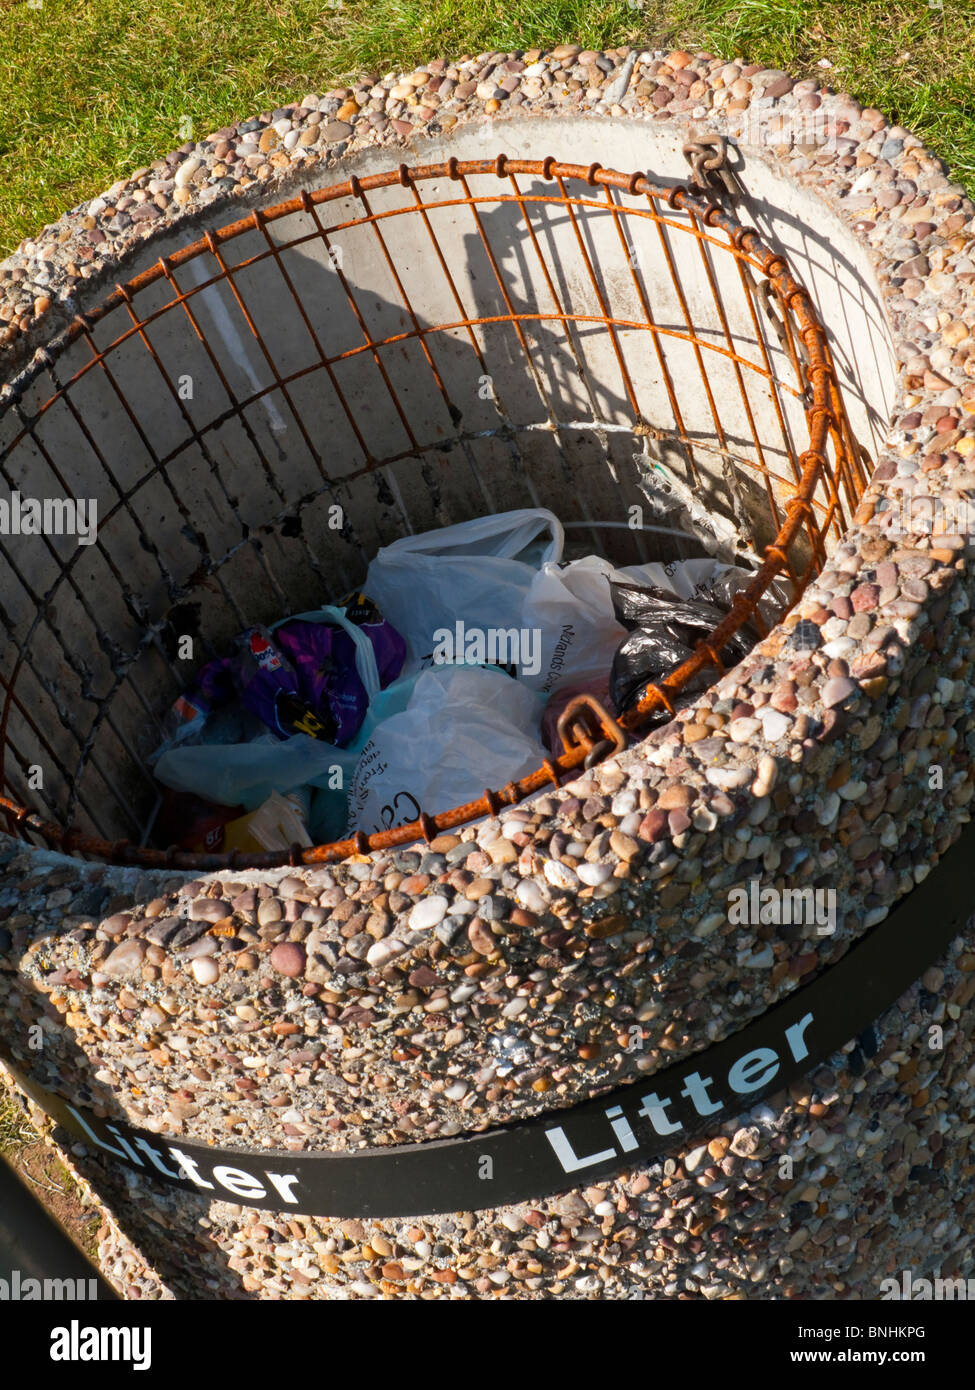 Close up view of concrete litter bin with rubbish placed in the internal wire basket Stock Photo